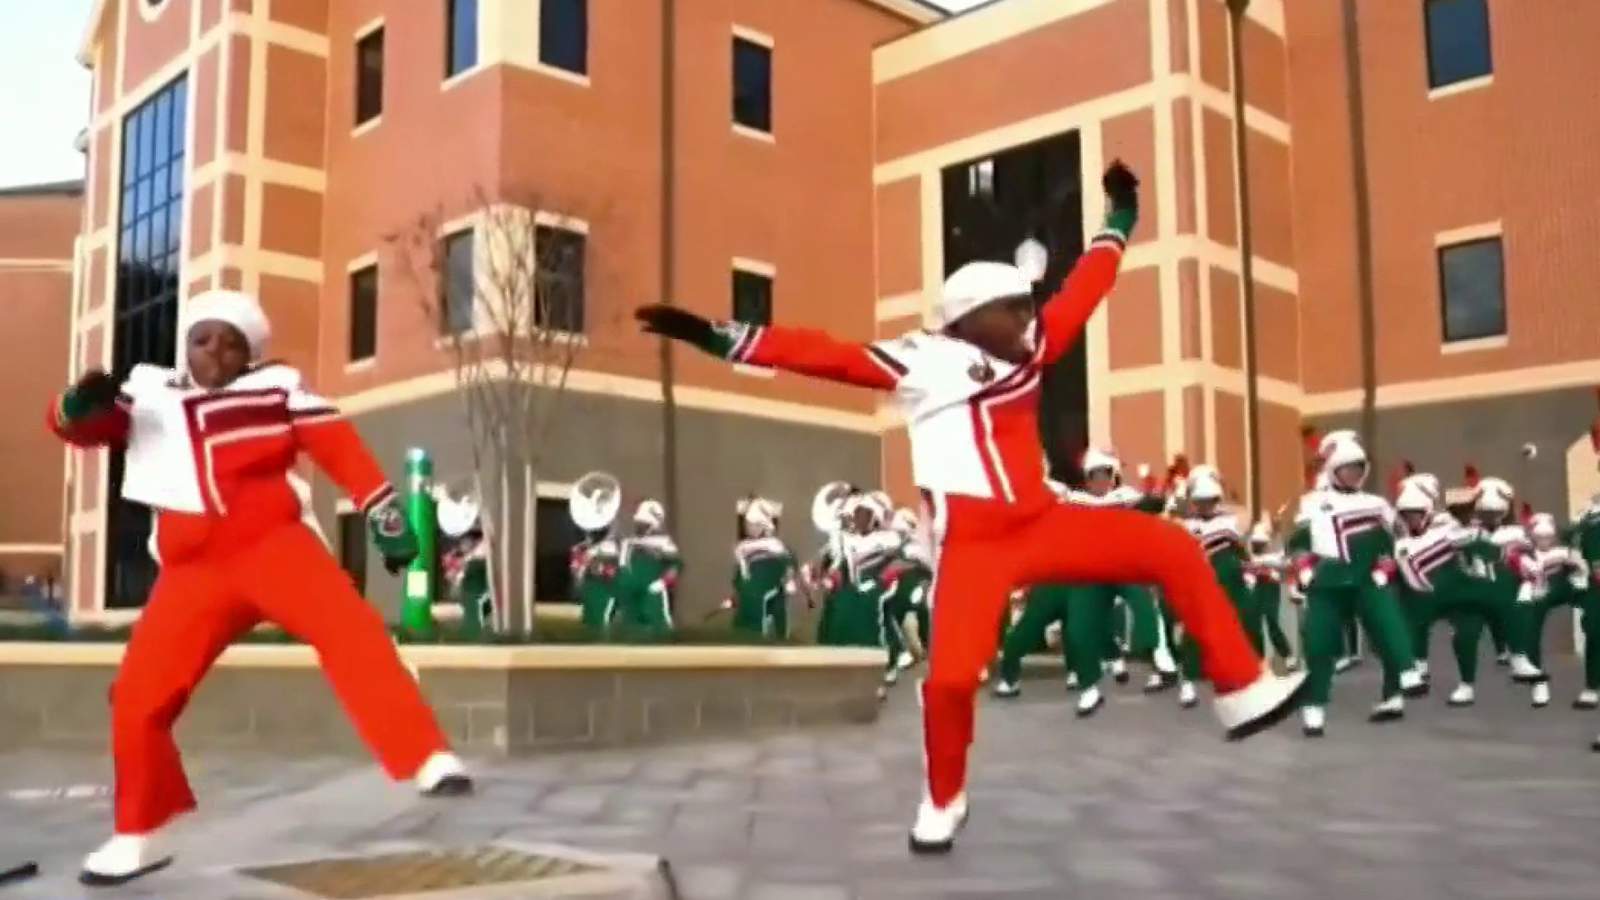 FAMU’s Marching 100 performs in virtual event for presidential inauguration